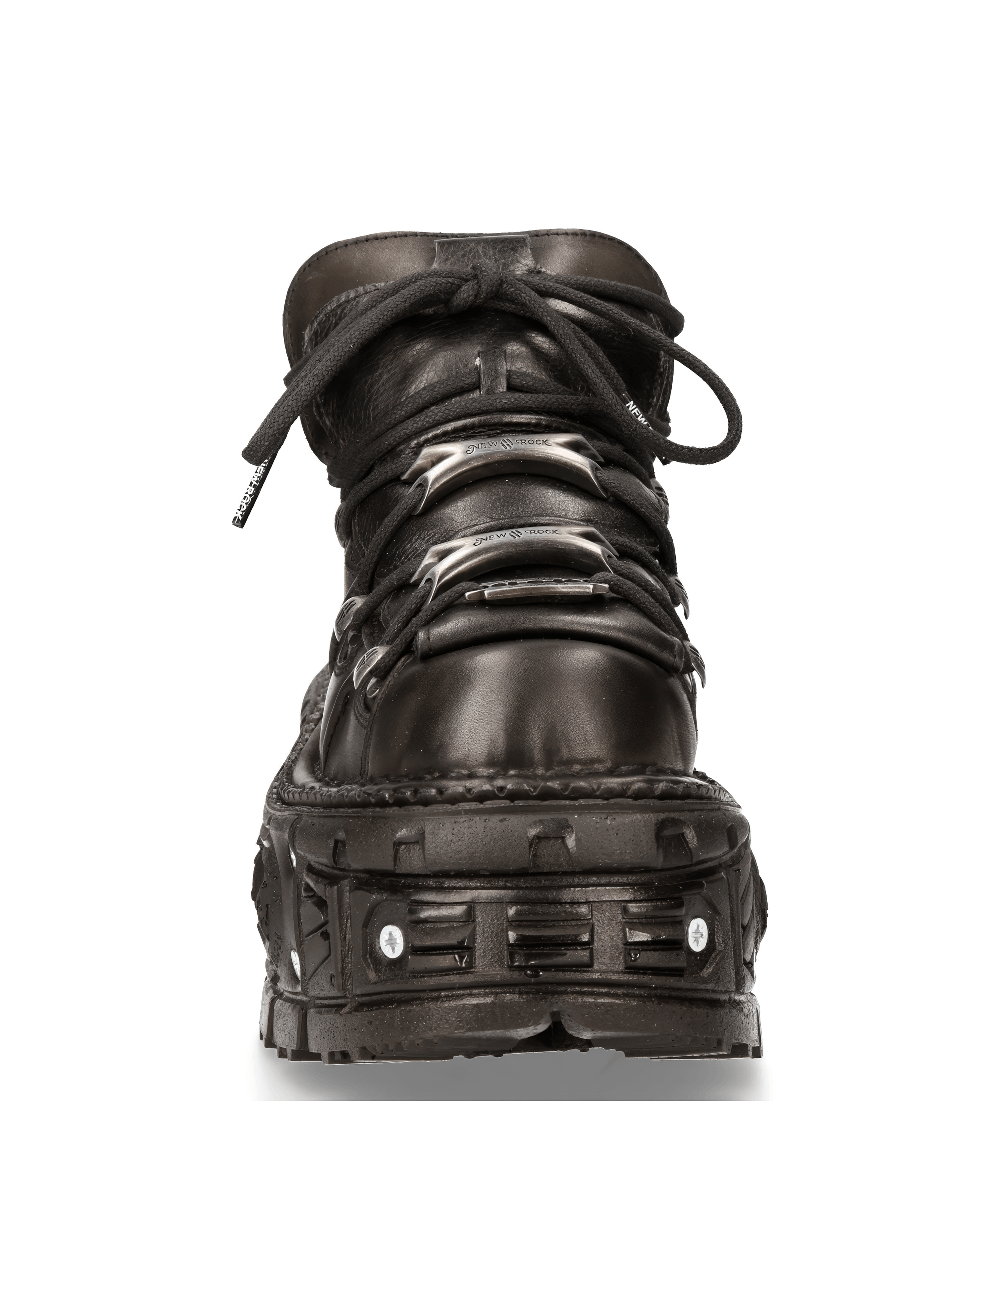 NEW ROCK Black Leather Ankle Boots for Rock Enthusiasts